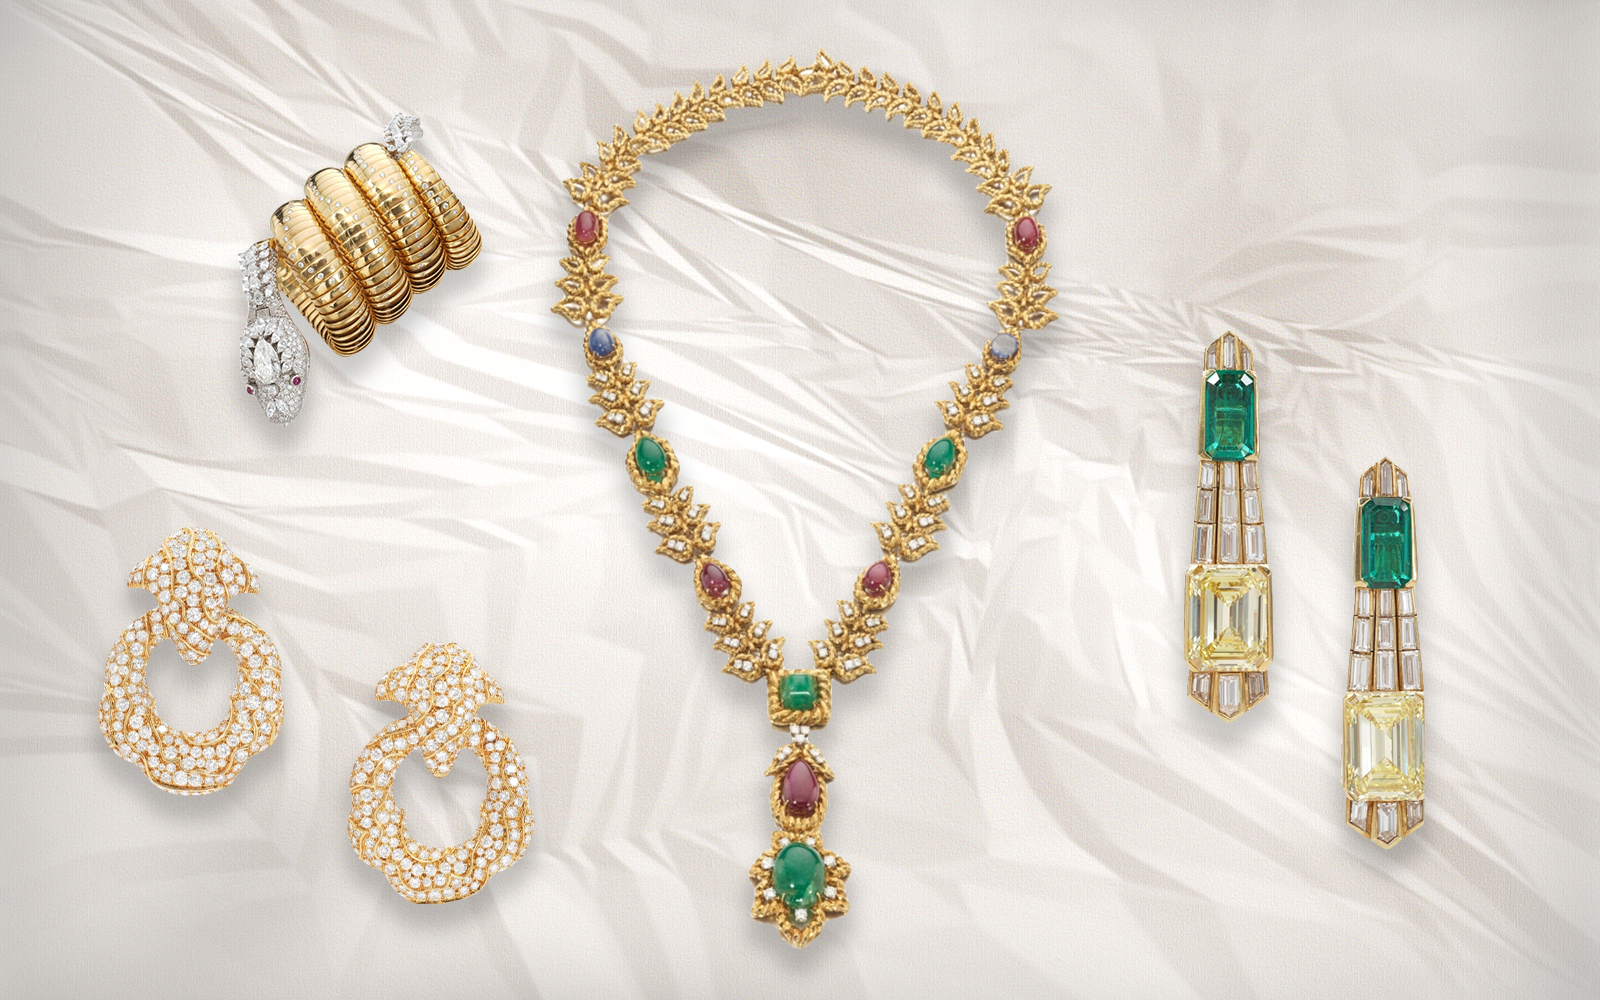 Clockwise from top left: Bulgari 'Serpenti' bracelet-watch, aka 'Theodorus' (estimate CHF 200,000-400,000), David Webb 'Hindu' necklace (estimate CHF 60,000-80,000), Bulgari earrings (estimate CHF 400,000-600,000), and Marina B 'Esclave' diamond and gold ear clips, circa 1980 (estimate CHF 12,000 - 18,000), part of the Sotheby’s ‘Iconic Jewels: Her Sense of Style’ auction in May 2024